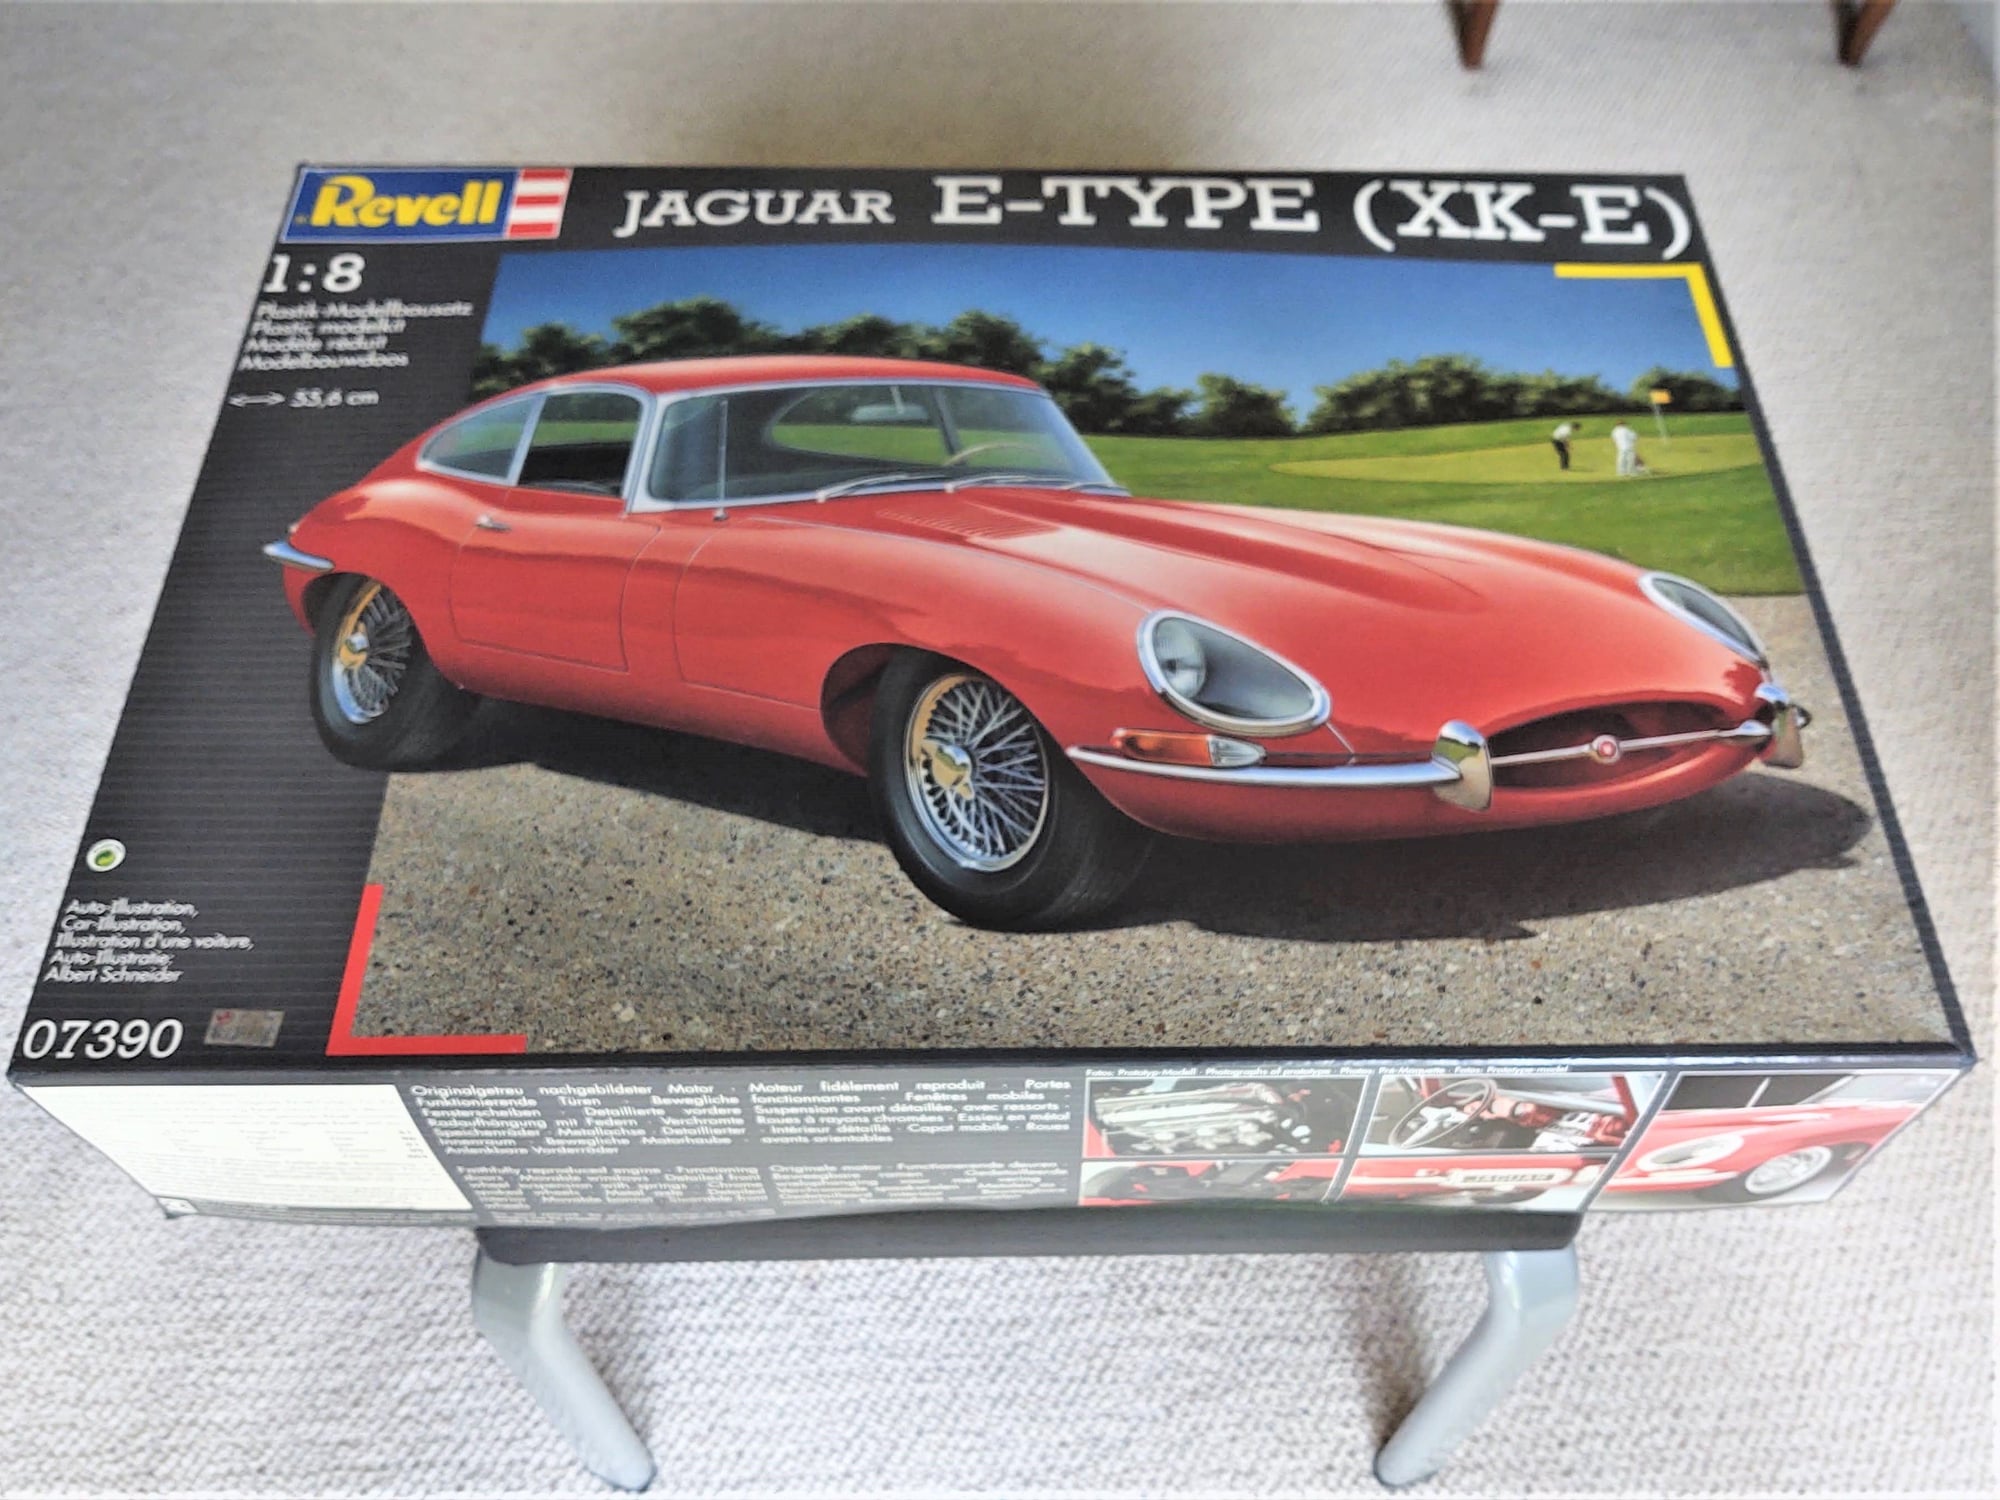 Miscellaneous - Revell 1:8 Scale Jaguar E-Type Model - Unbuilt/Complete/Mint Condition - New - All Years Jaguar All Models - San Diego, CA 92122, United States